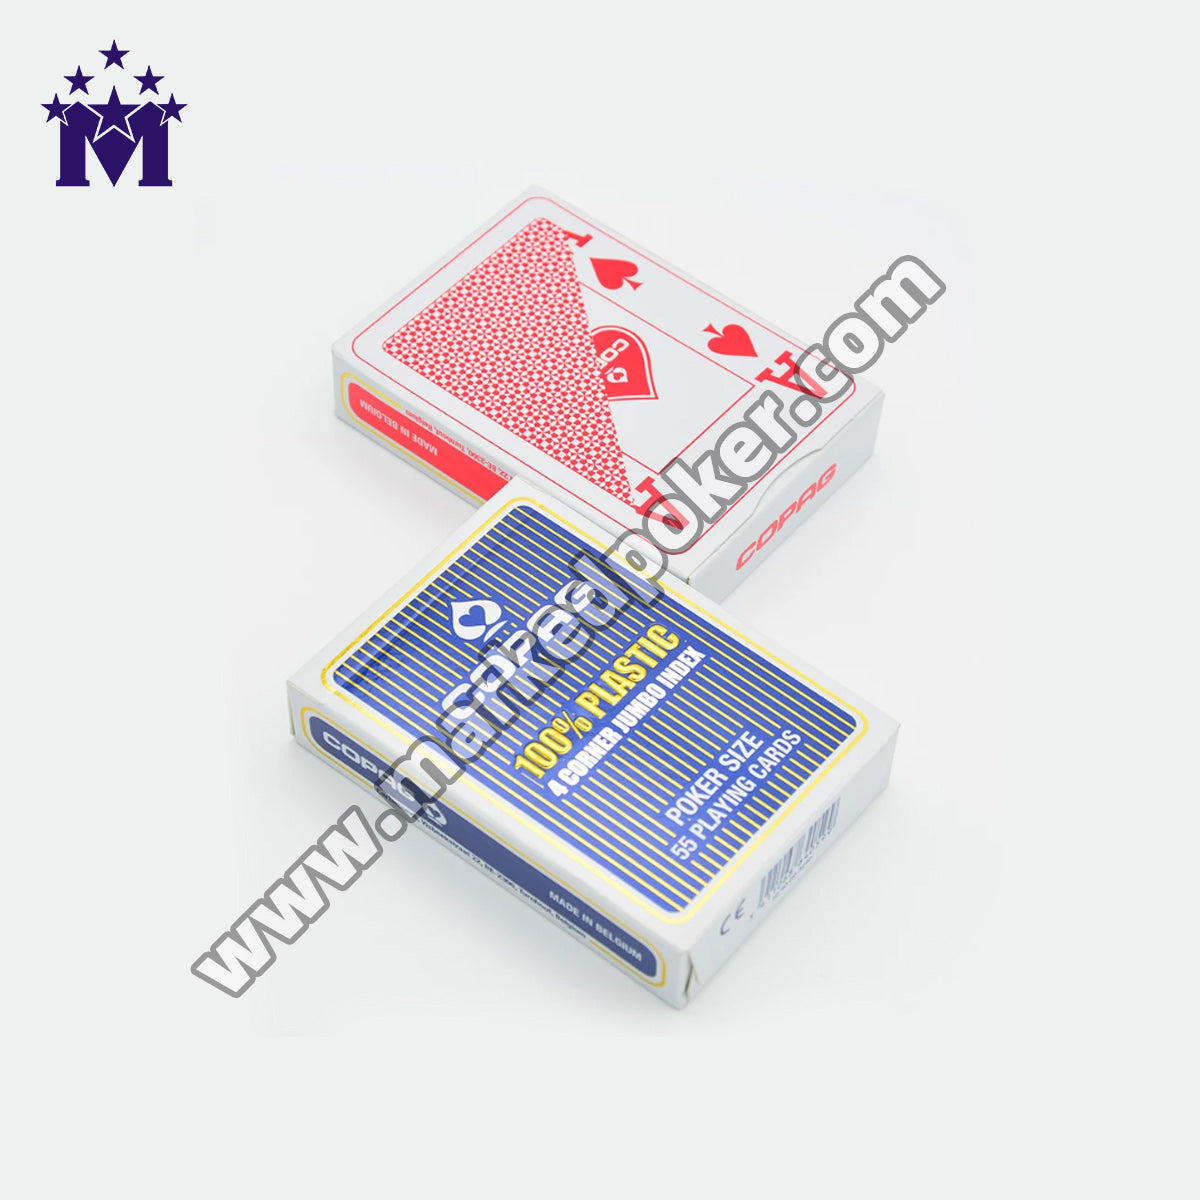 Copag 4 Corner Barcode Marked Cards For Poker Cheating Equipment